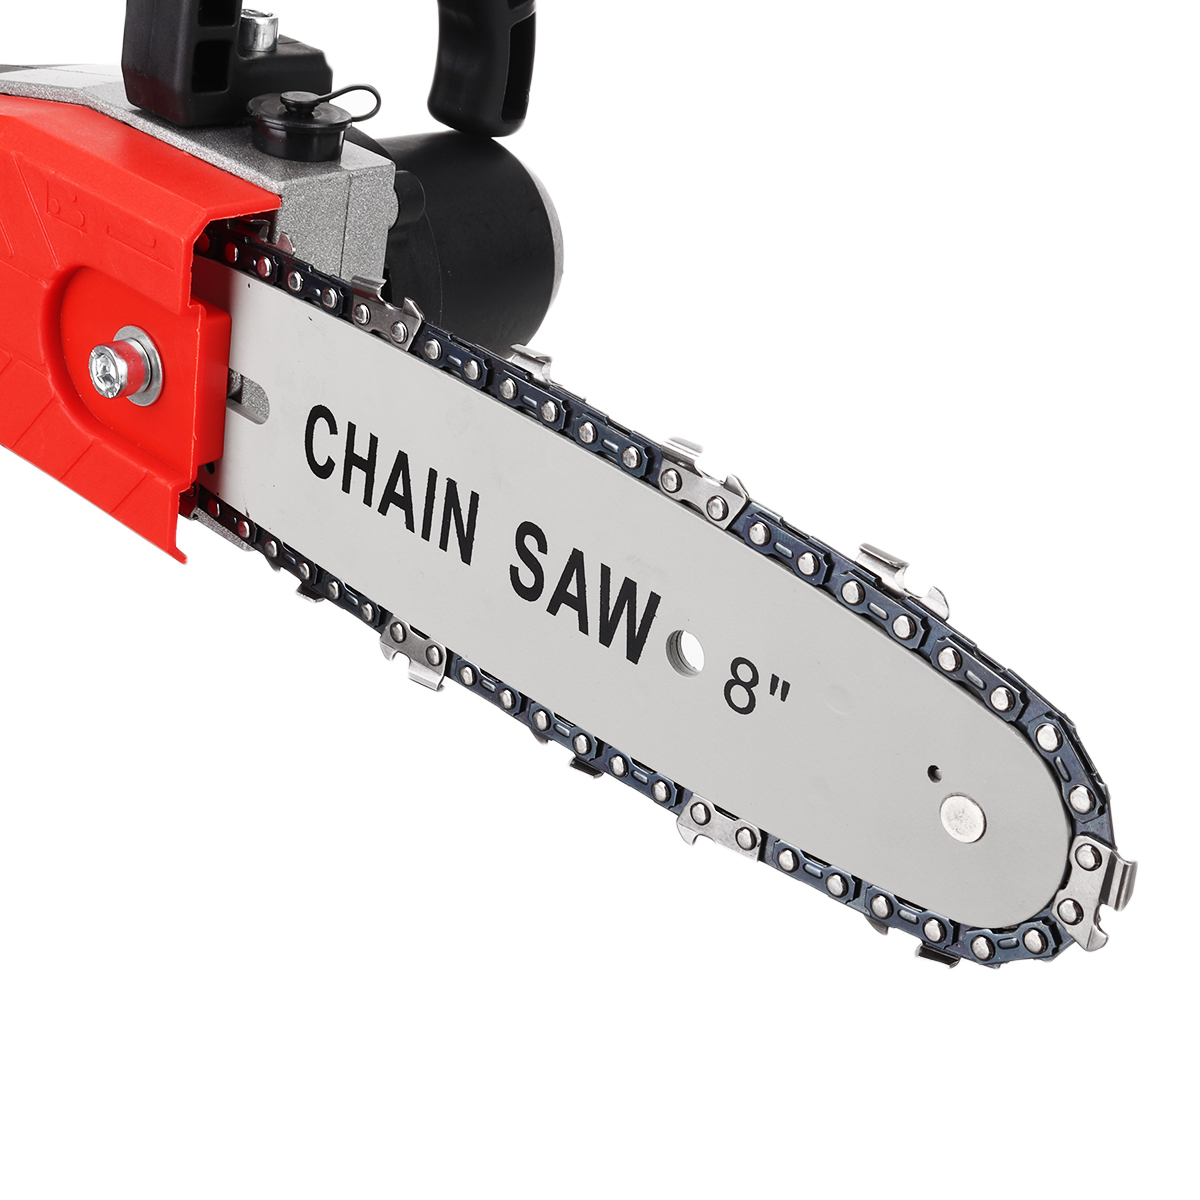 288VF-8Inch-Electric-Chain-Saw-Cordless-One-Hand-Chainsaw-Woodworking-Tool-W-12None-Battery-1845268-9